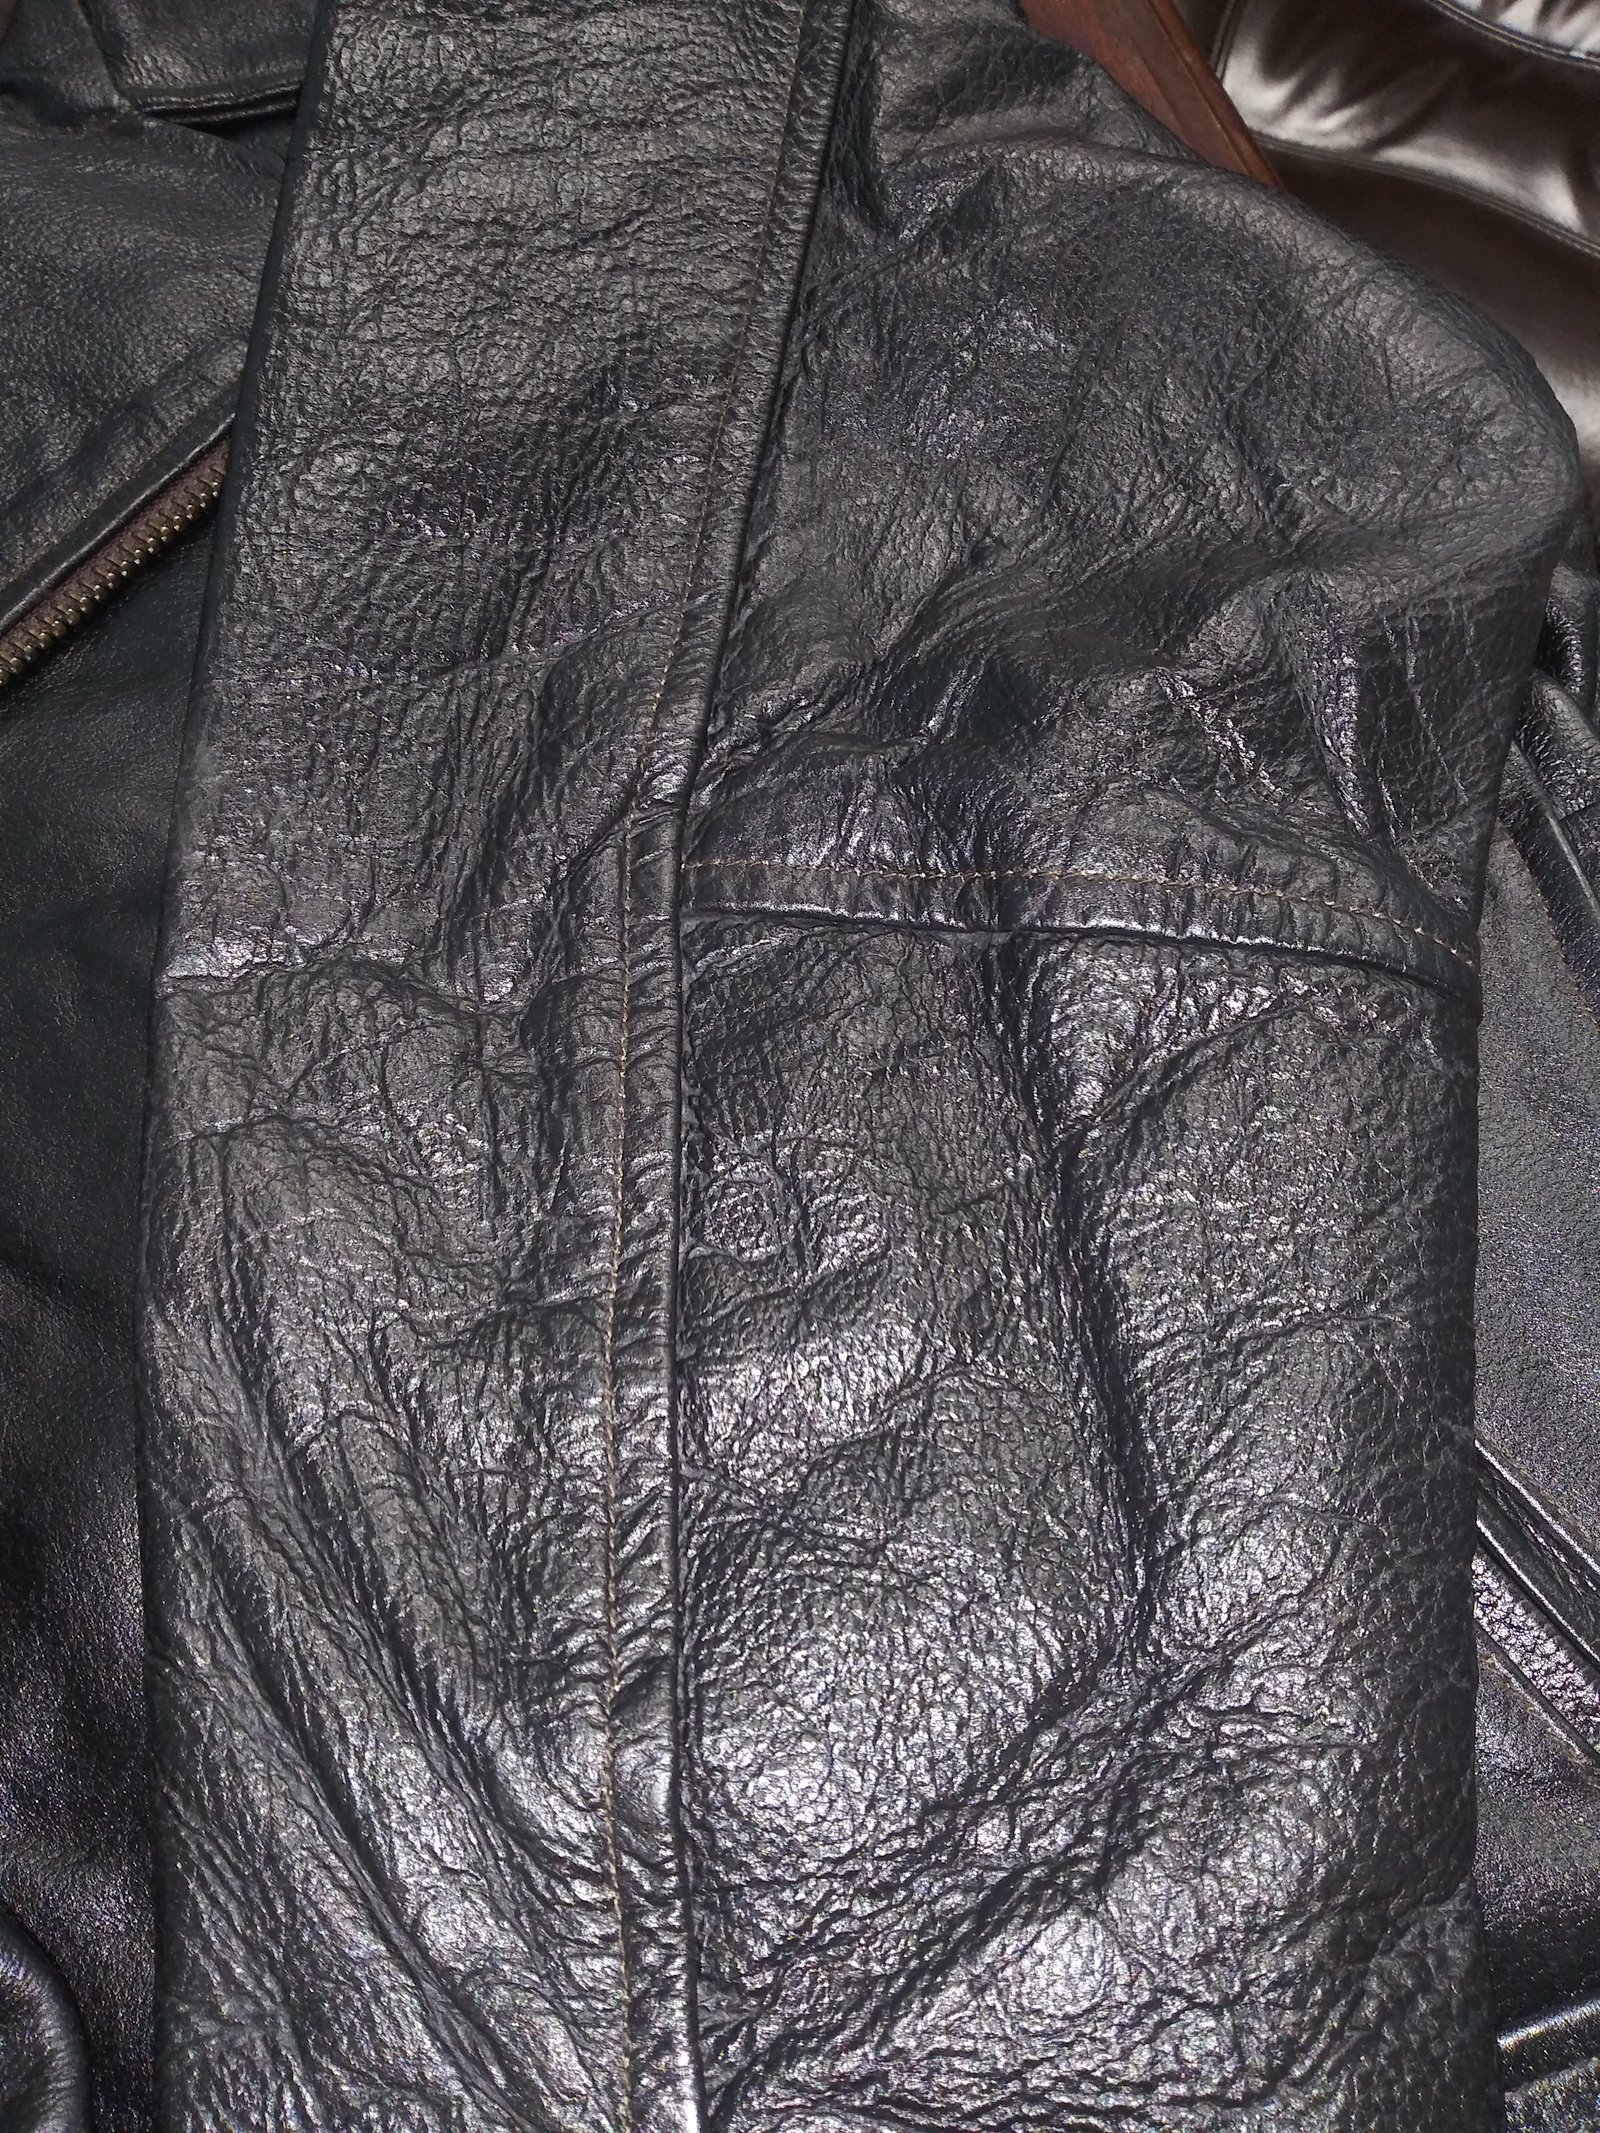 Embossed Retro Black Eagle Motorcycle Jacket with Side Laces and Live To Ride - SKU MJ703-01-NLR-DL